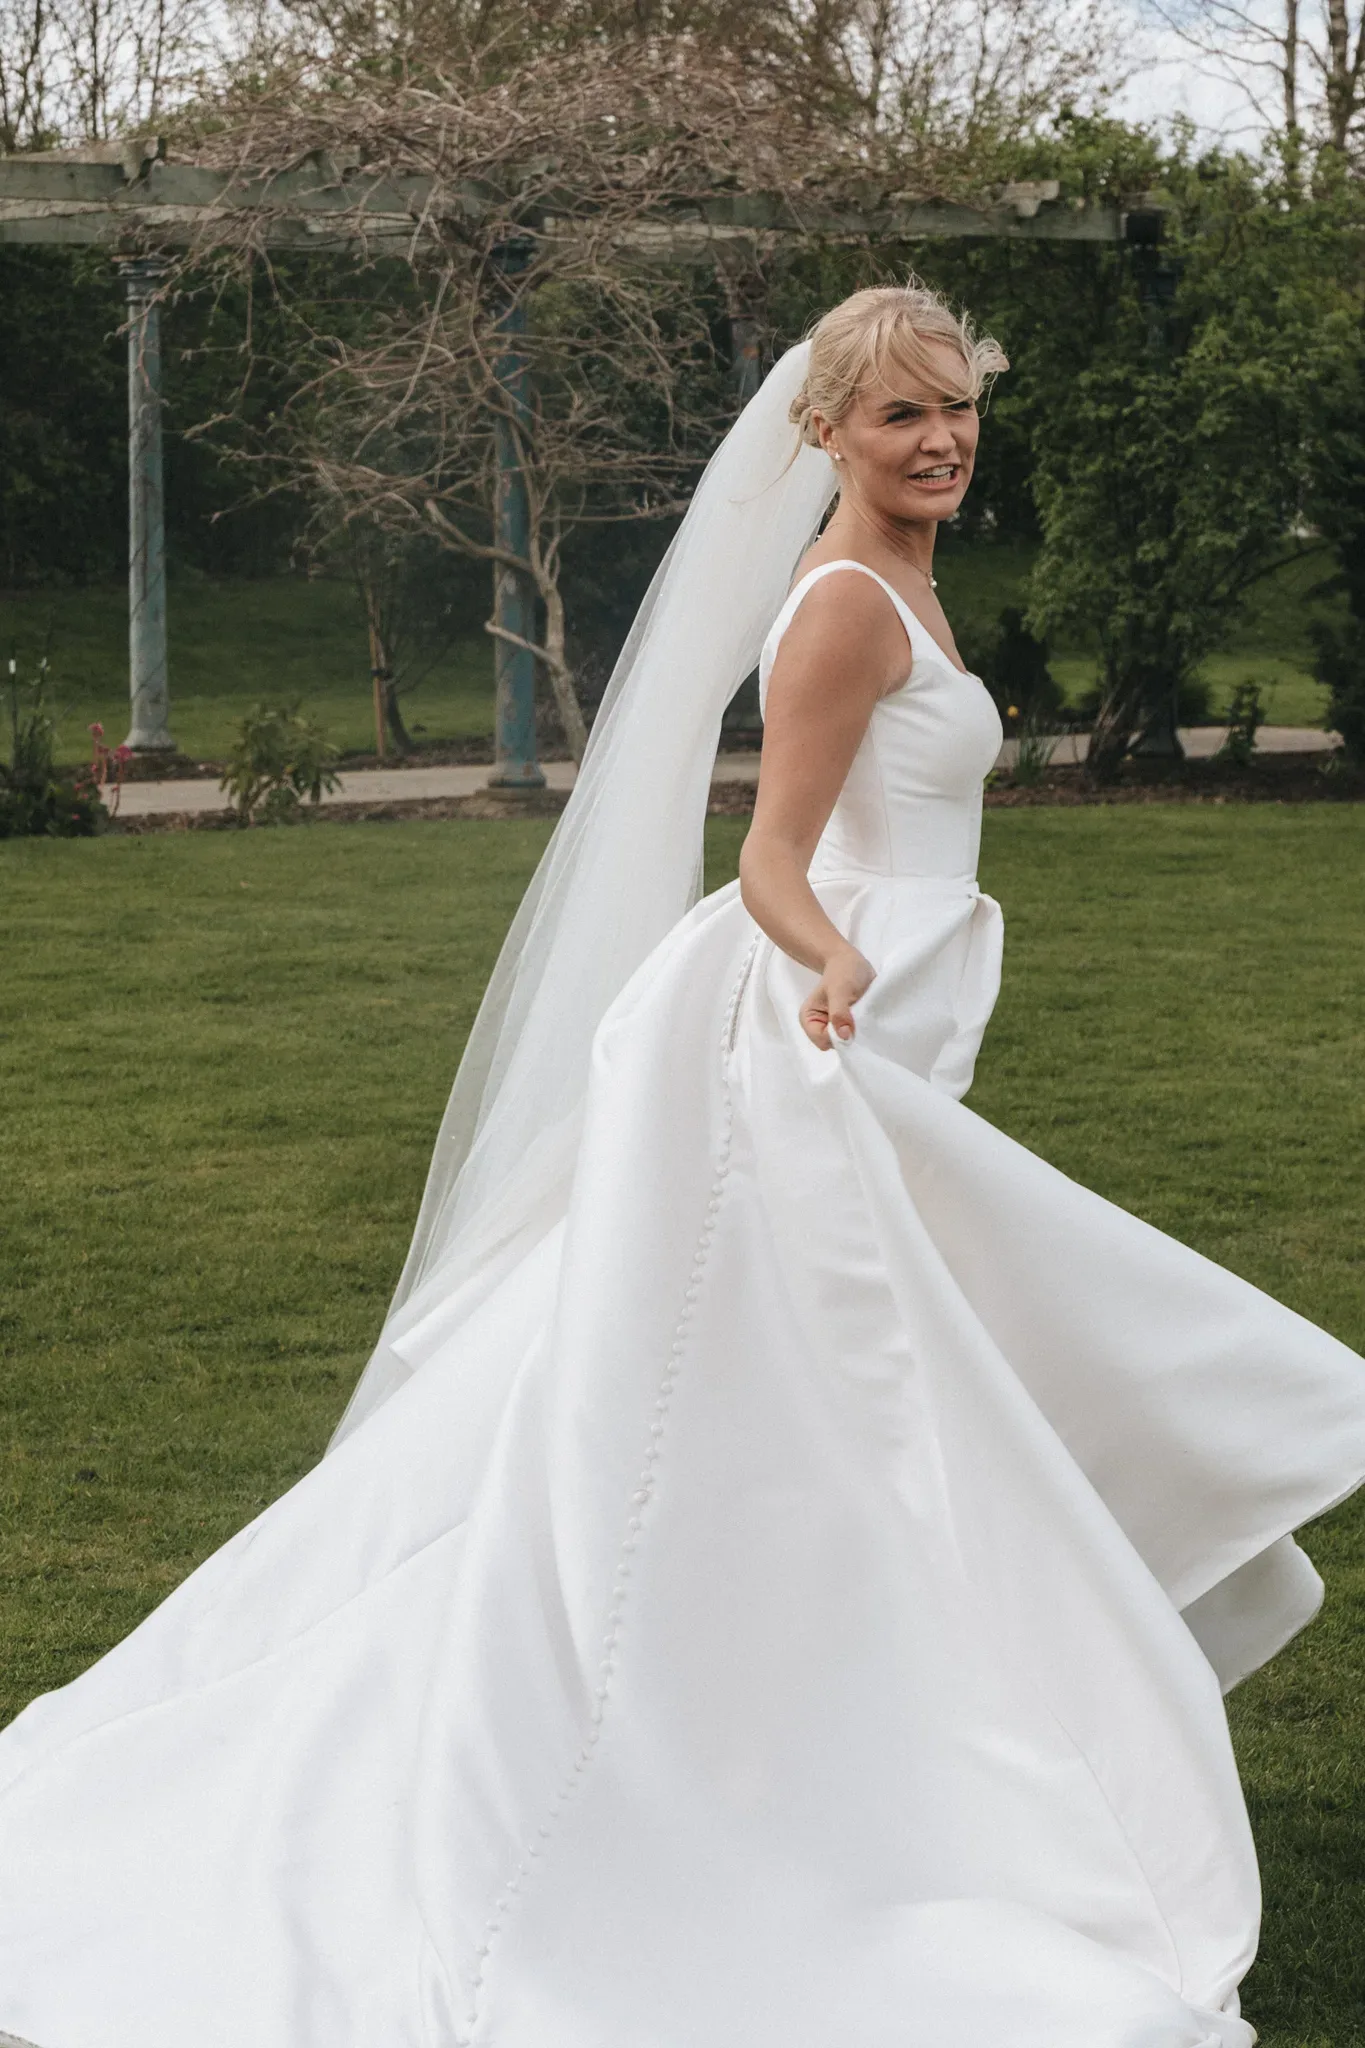 A bride in a white wedding dress with a flowing veil smiles over her shoulder while walking in a lush garden, her dress billowing gently behind her.